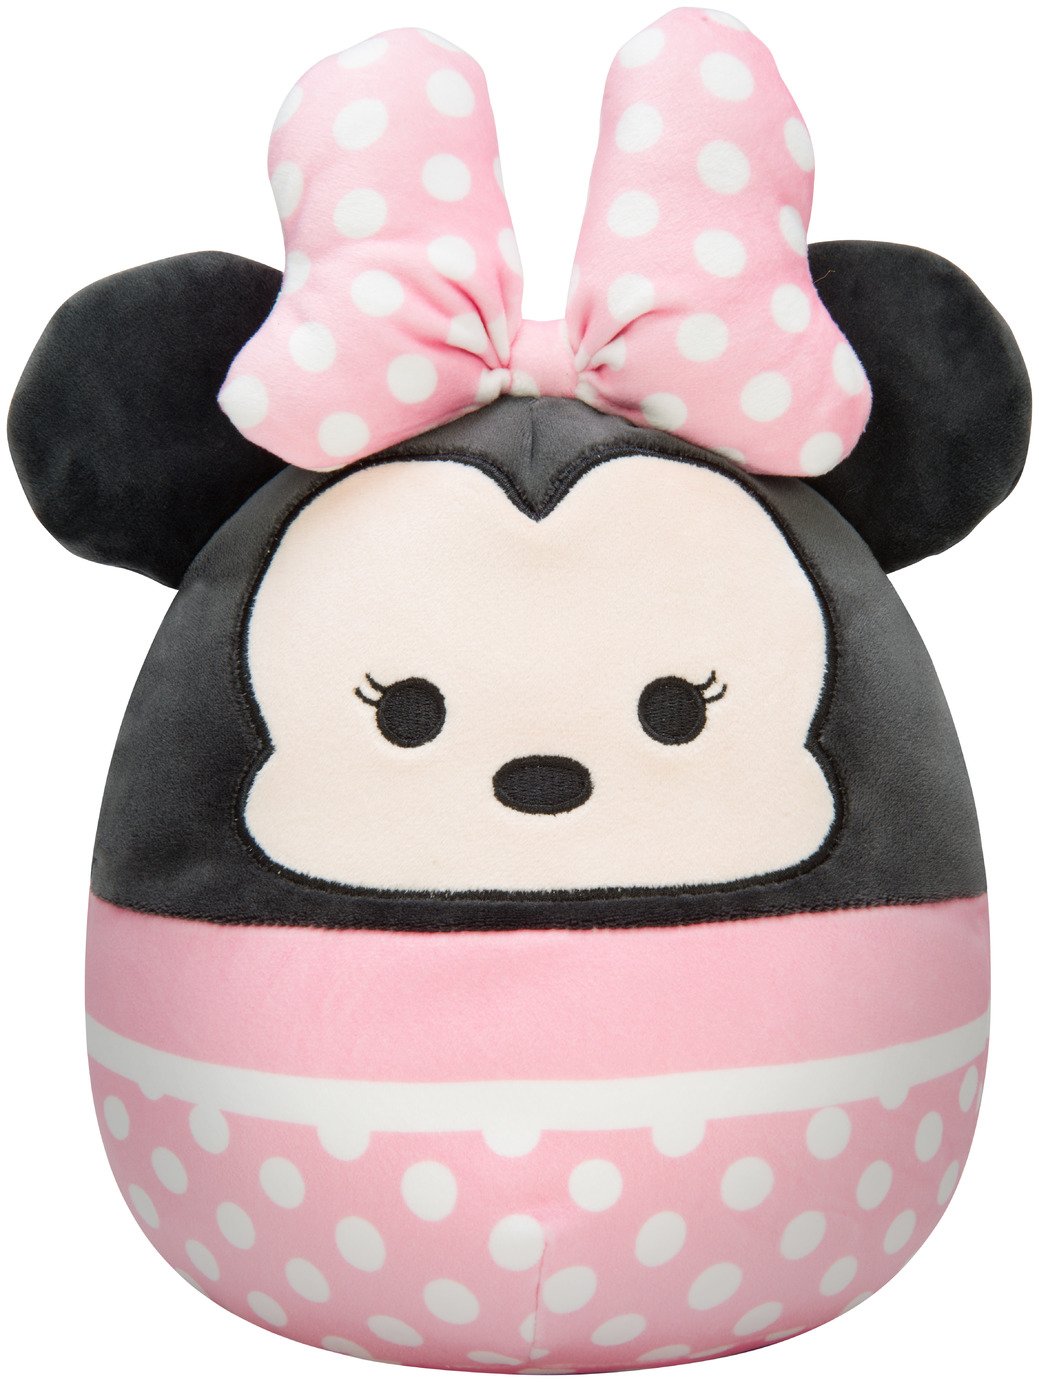 Squishmallows 14-inch - Disney Minnie Mouse